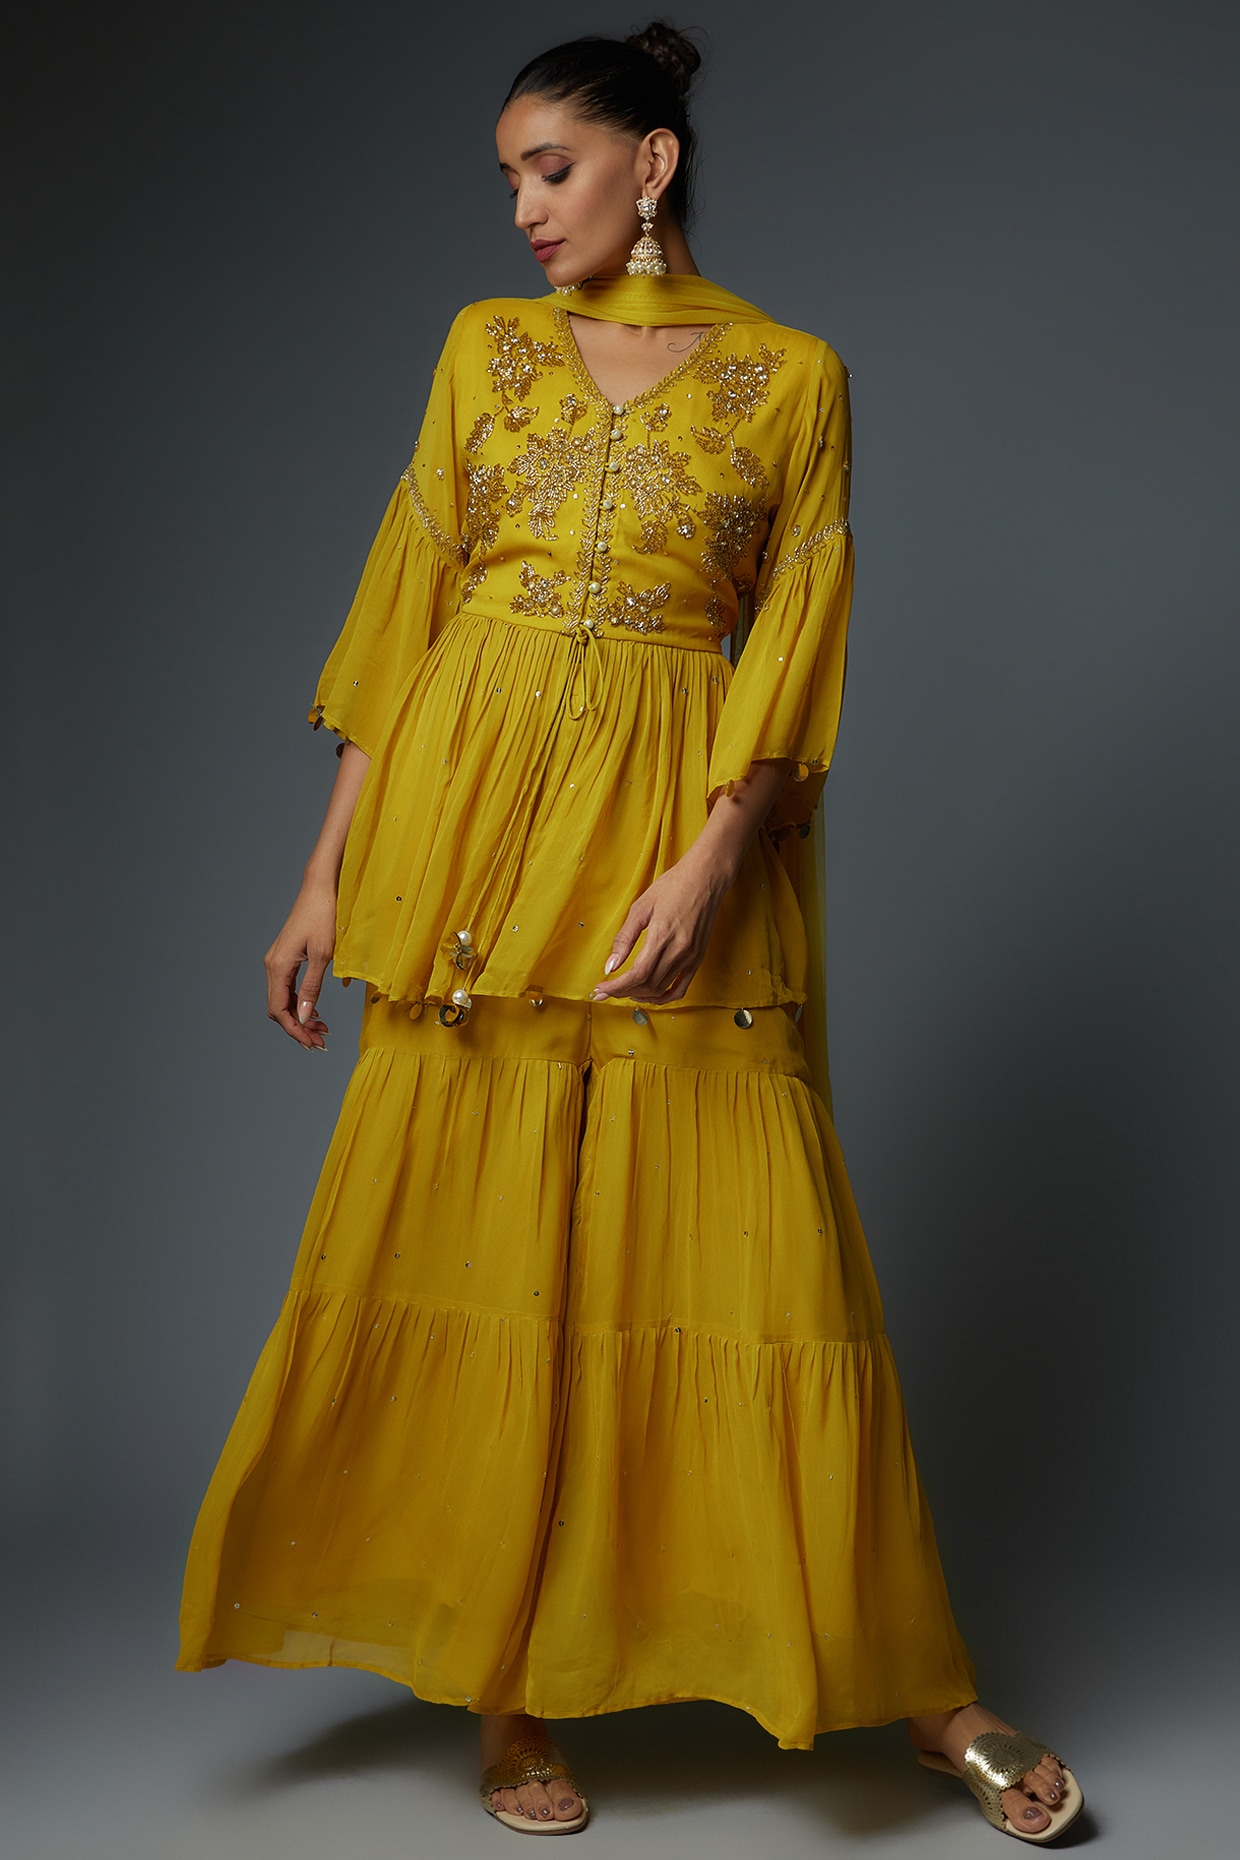 Simple Short Frock With Sharara | chapalapmc.com